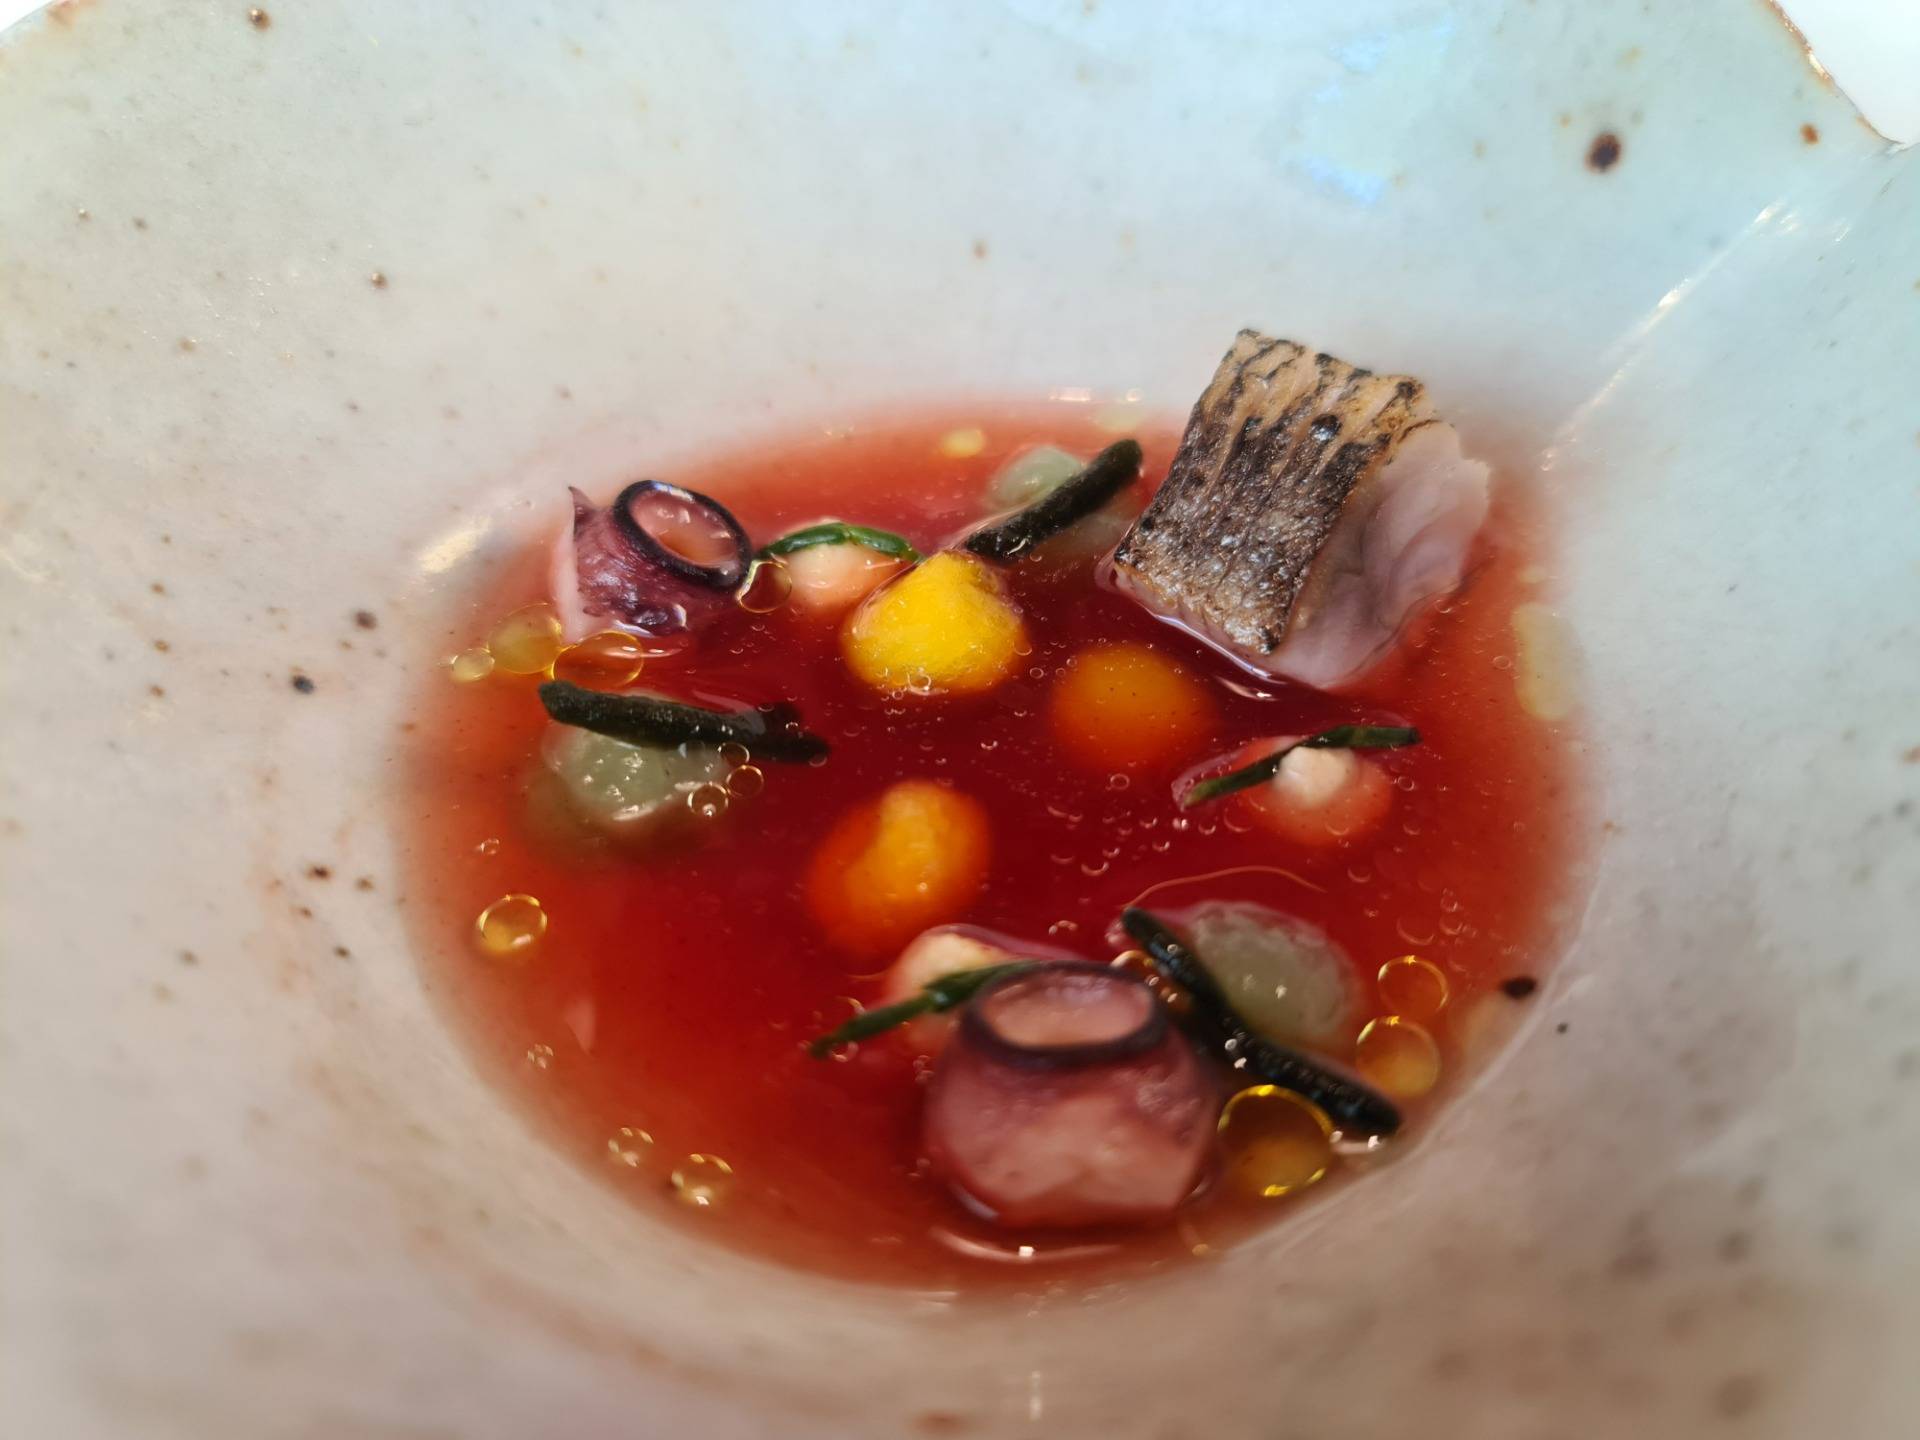 ”Sour and Spicy Stock”, third snack from the tasting menu (2).